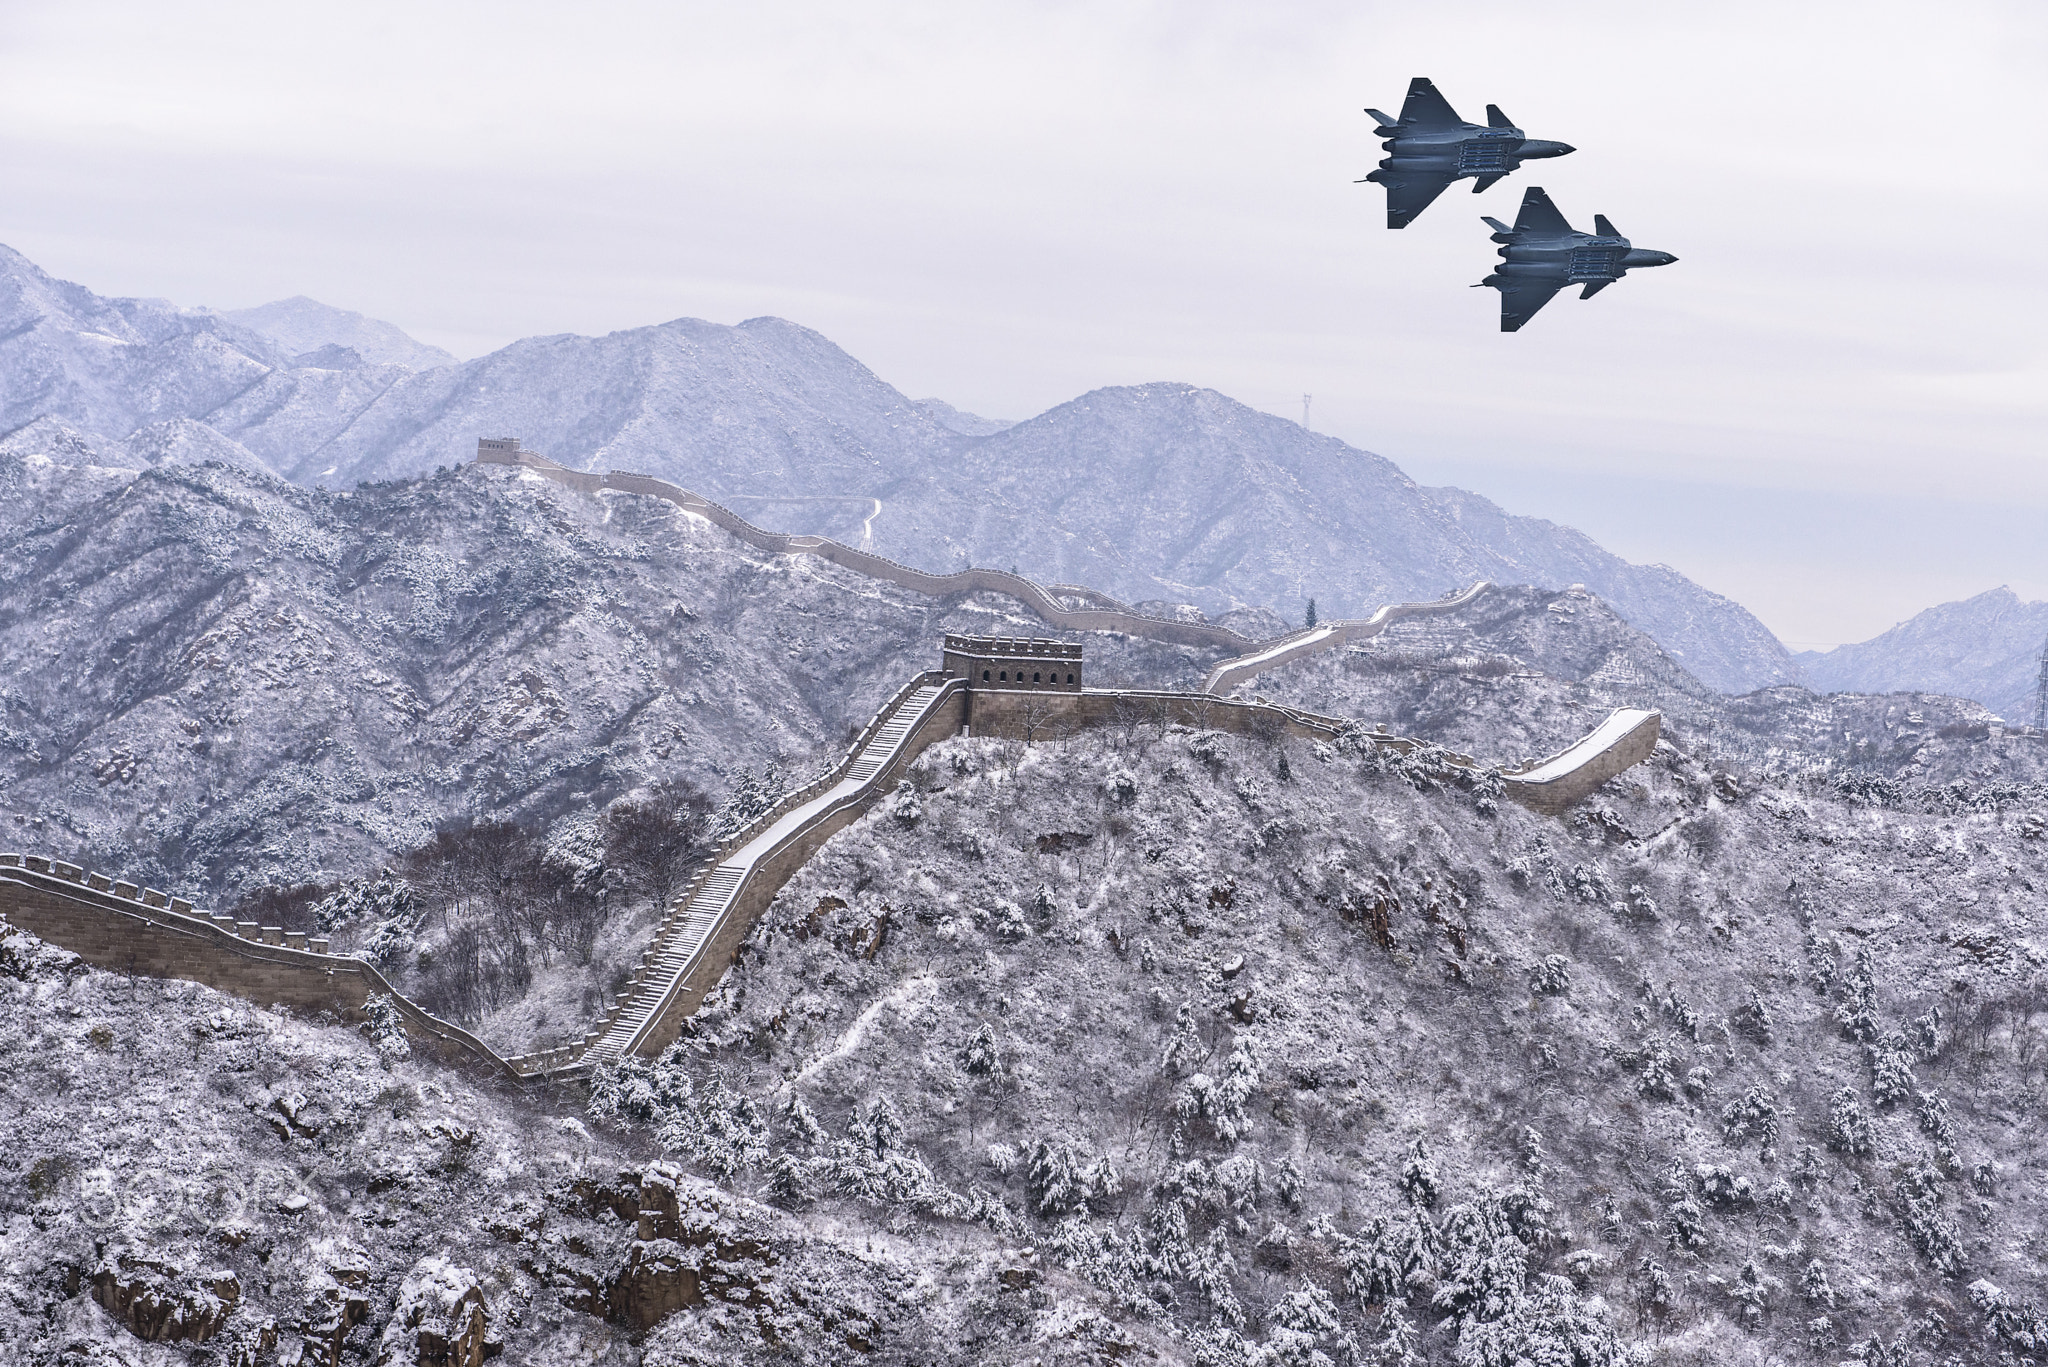 J20 fly over the Great Wall